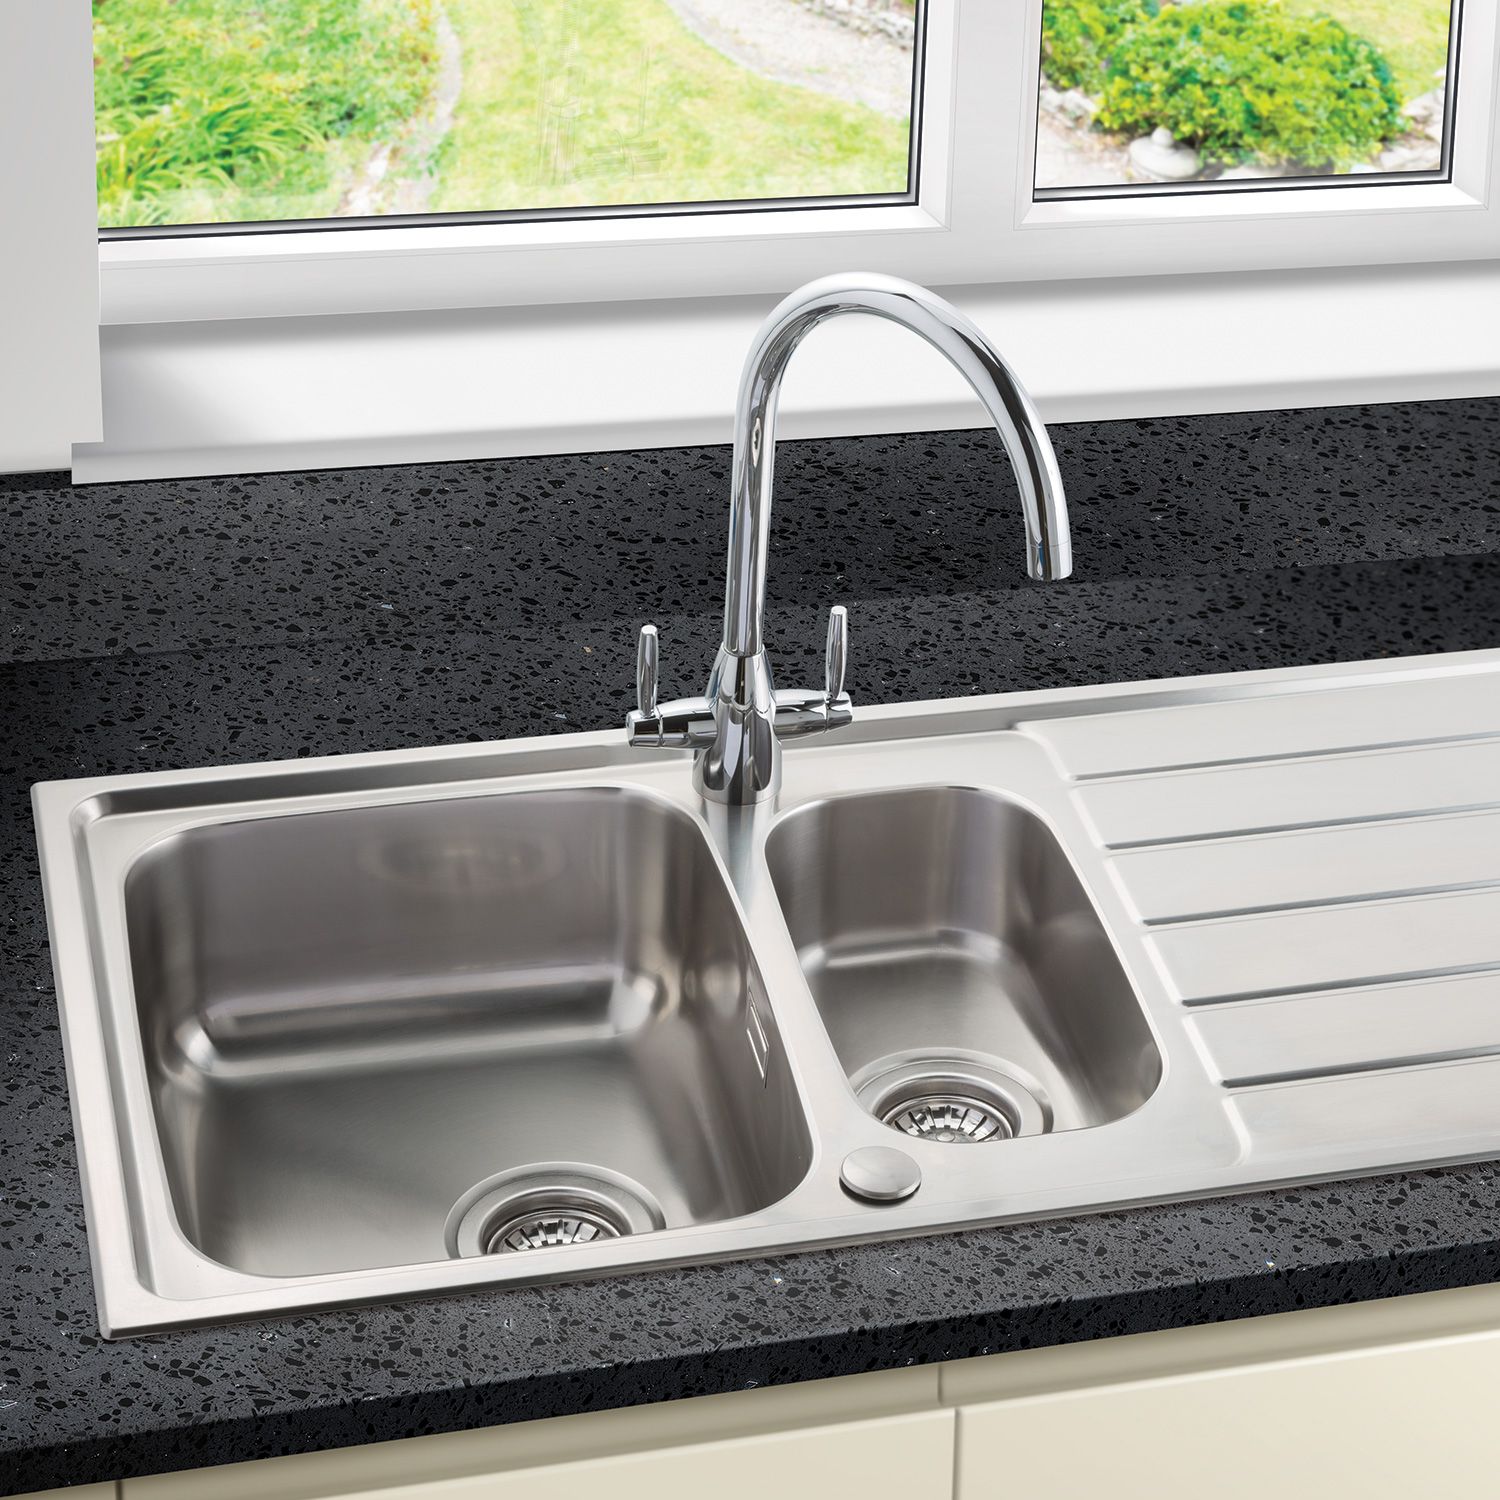 Bluci Siena 150 1.5 Bowl Sink and Drainer - Sinks-Taps.com